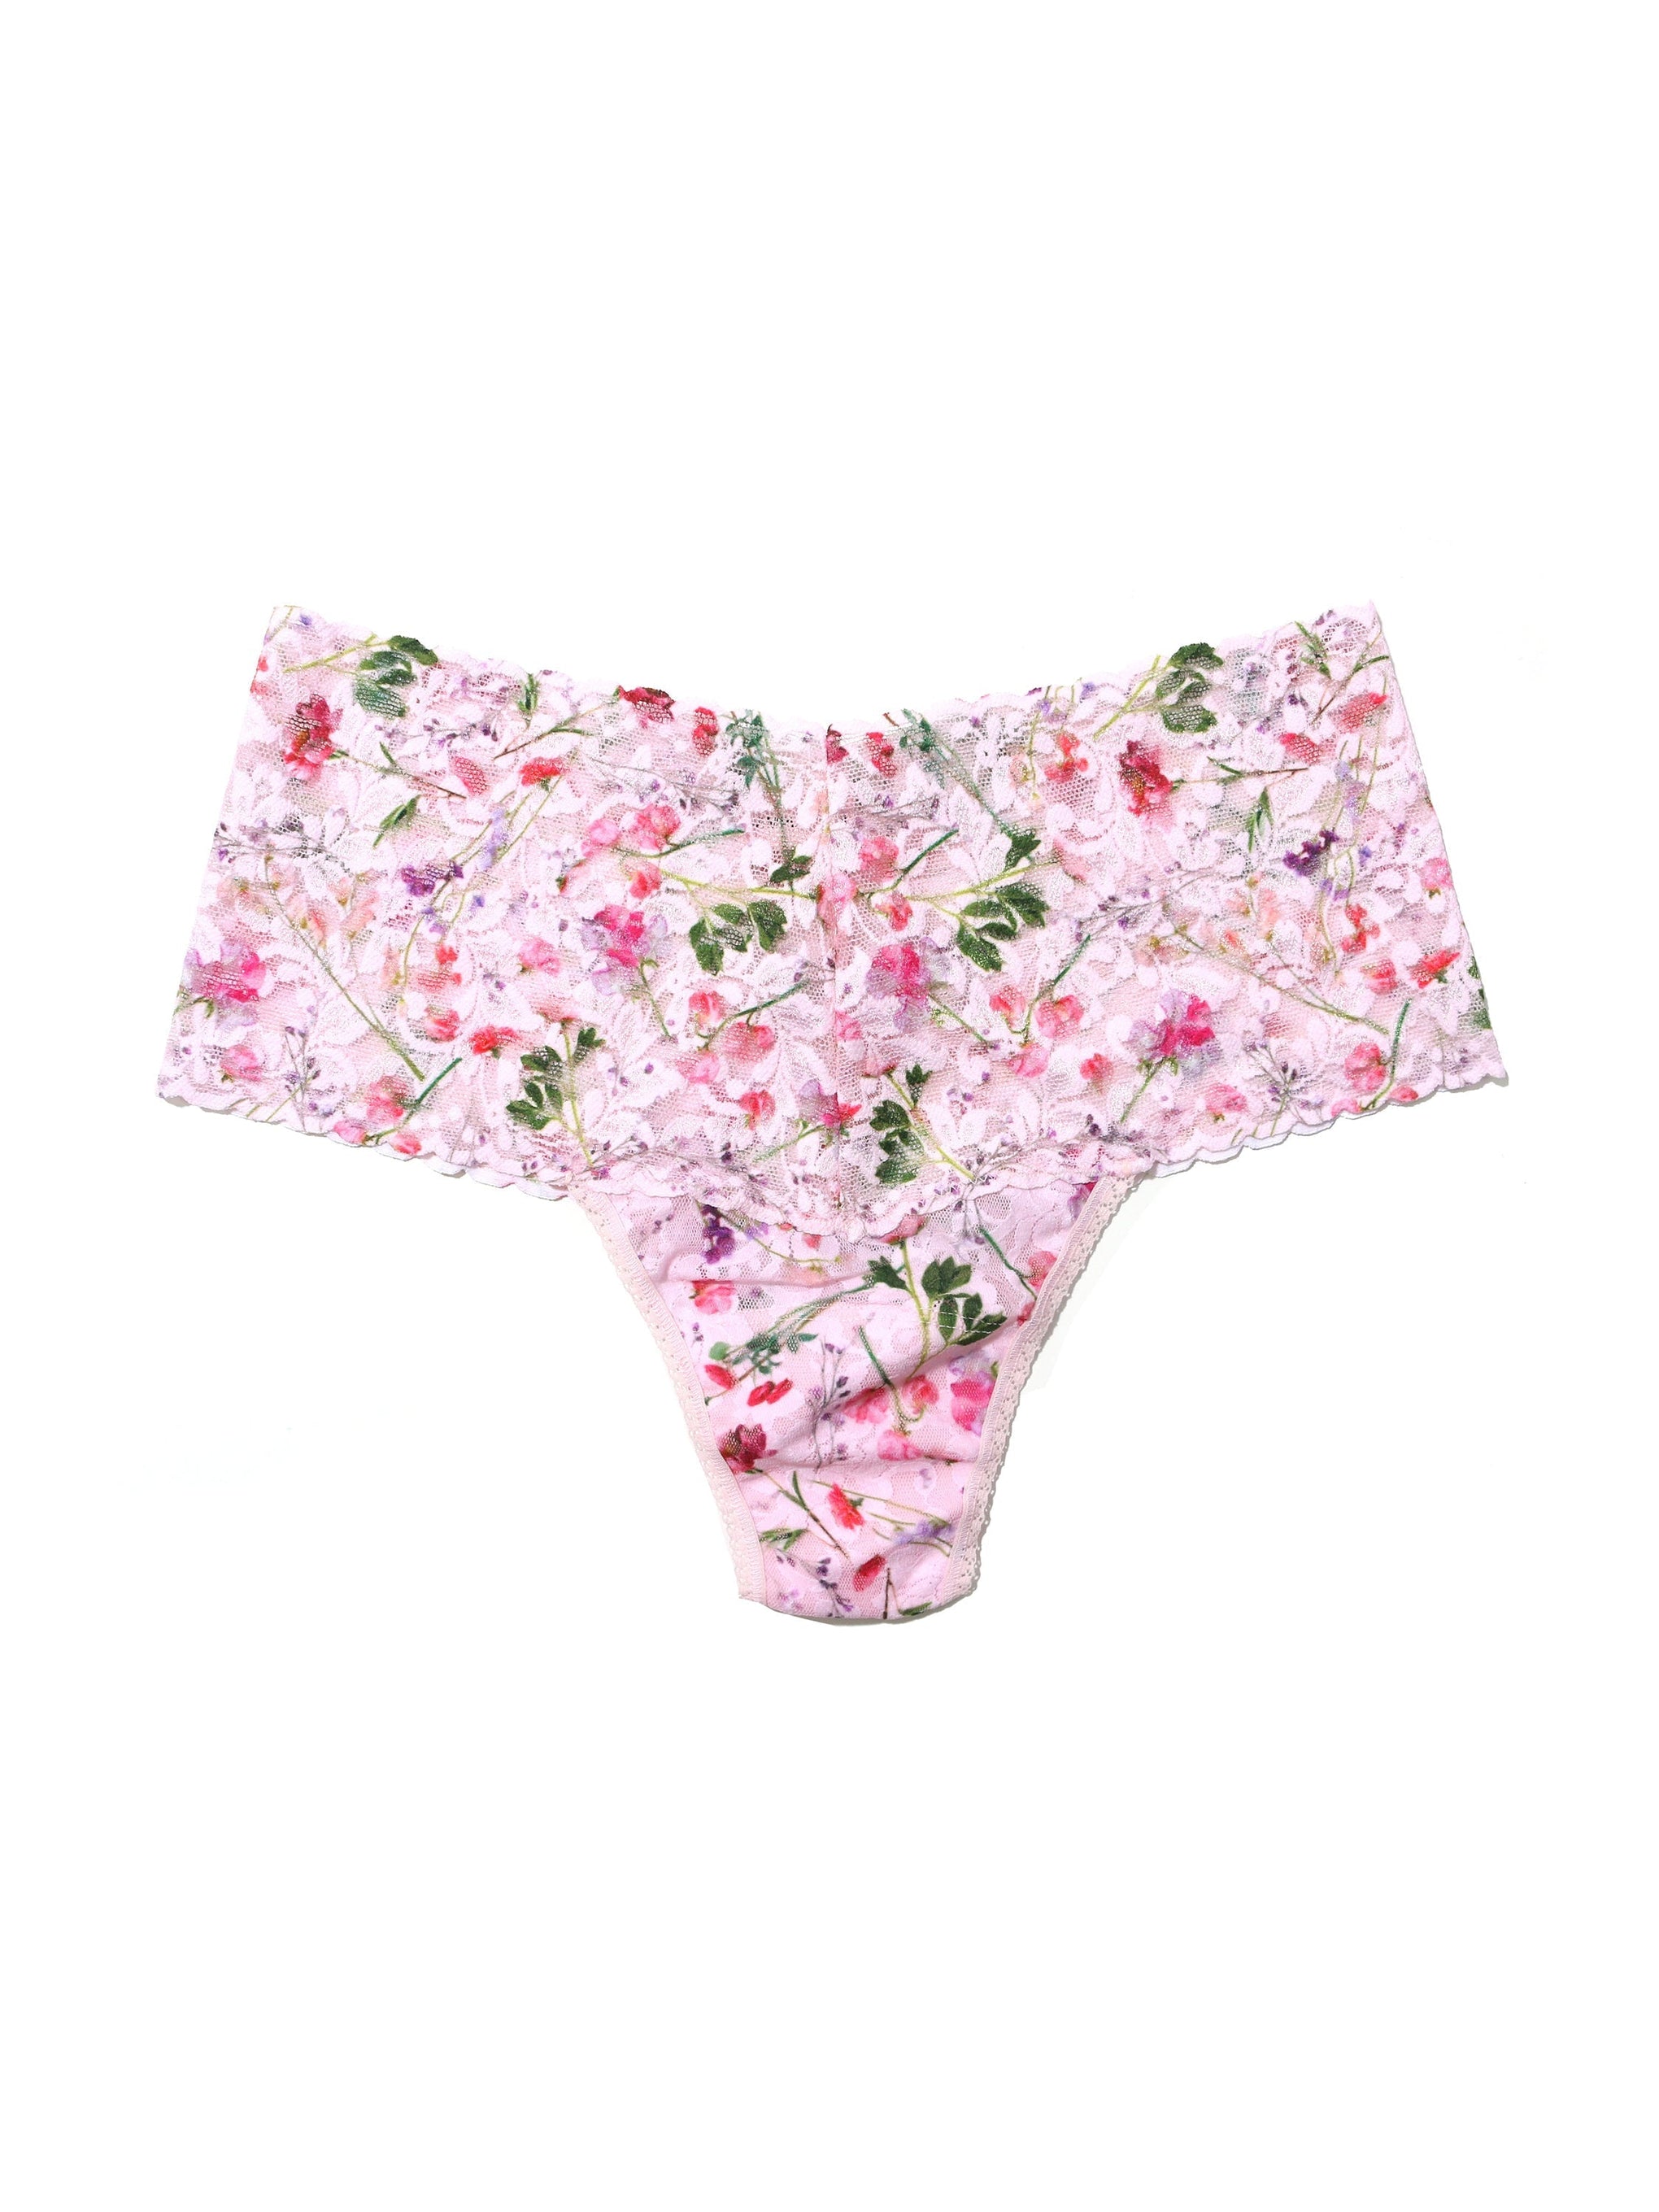 Printed Retro Lace Thong Rise And Vines Sale